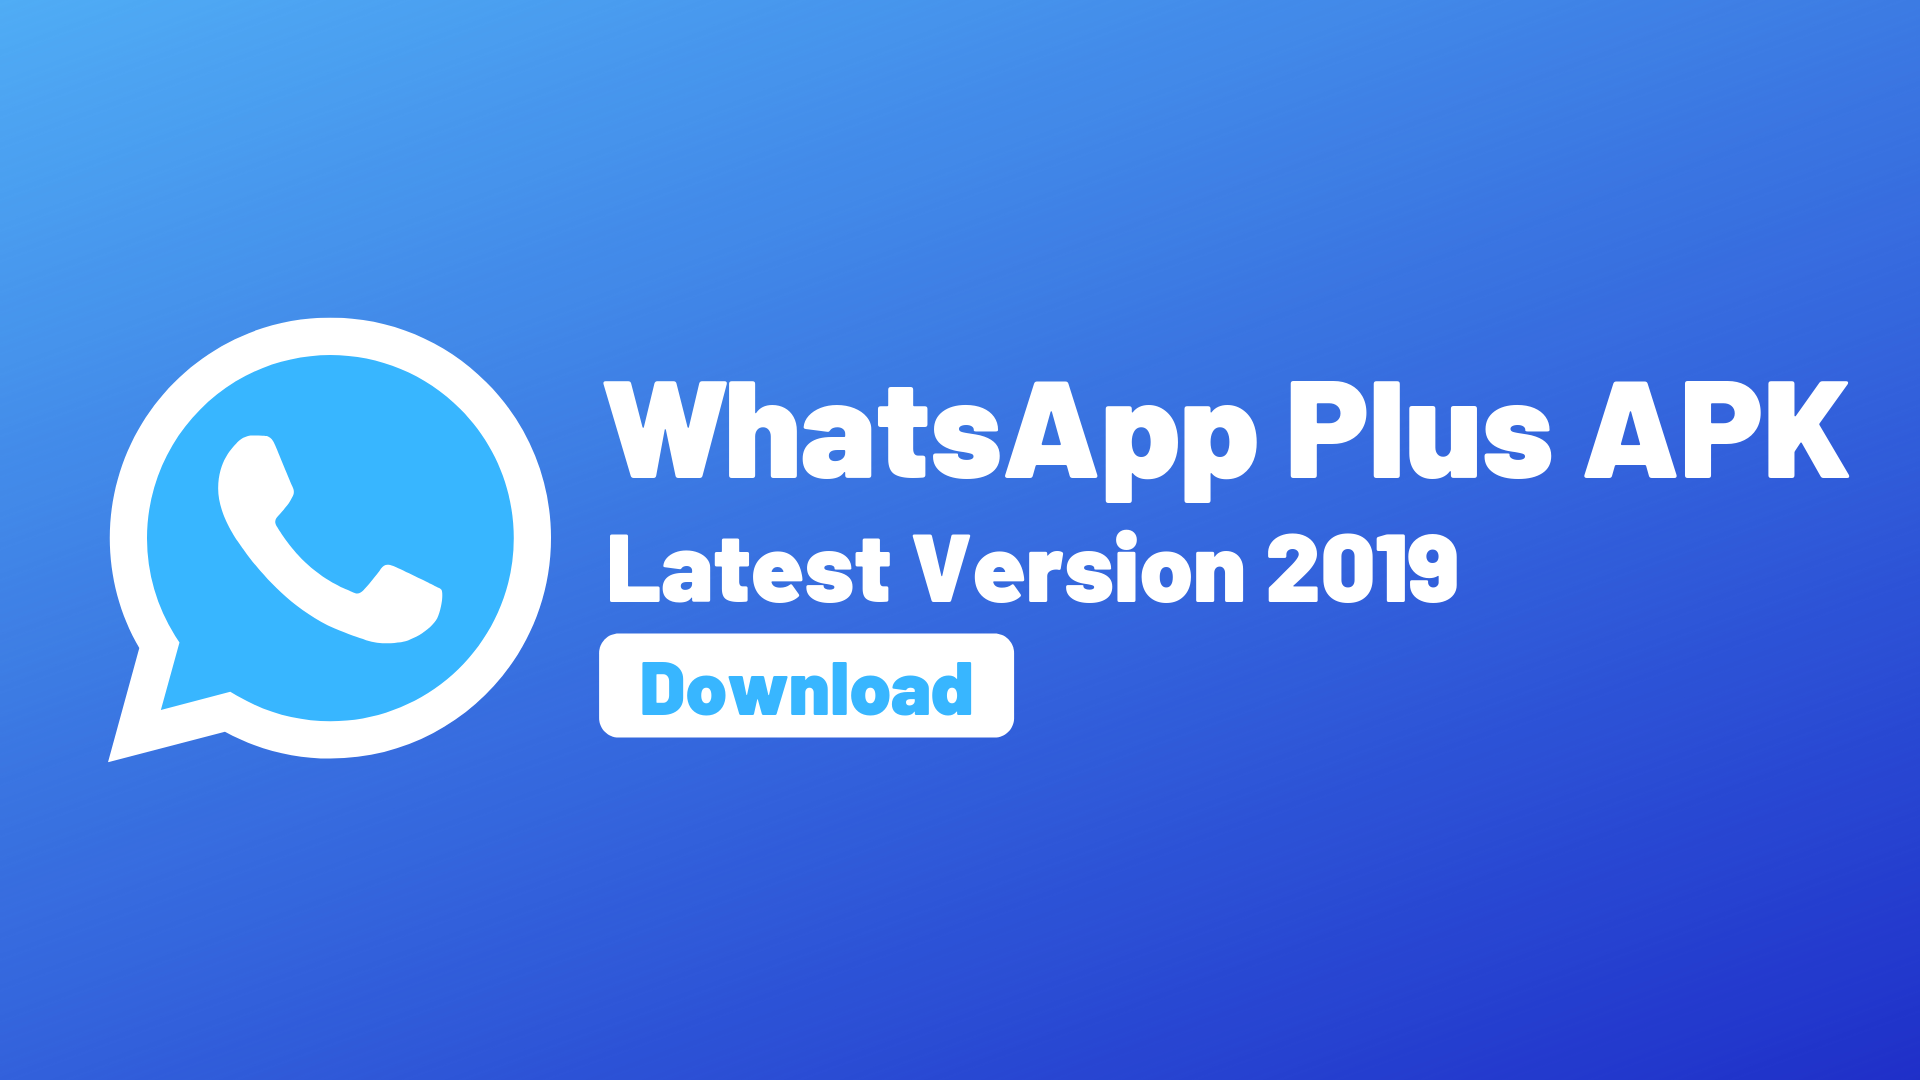 Download WhatsApp Plus 2019 APK for Android - Android Tutorial